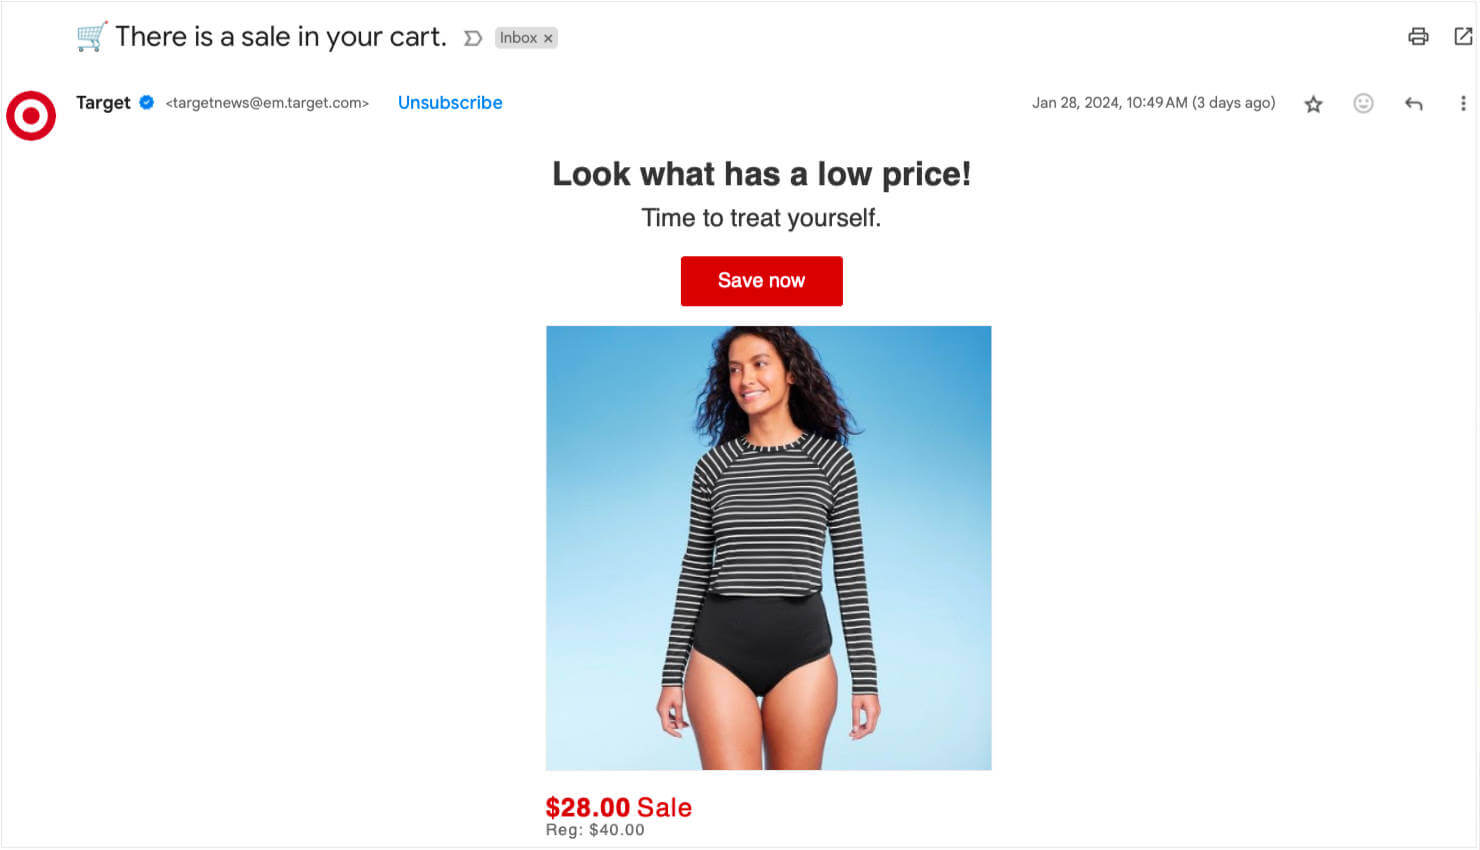 Win-back email example from Target. Subject line says "There is a sale in your cart." Email text says "Look what has a low price! Time to treat yourself." CTA button says "Save now." And there's an image of the product with the new sale price featured below